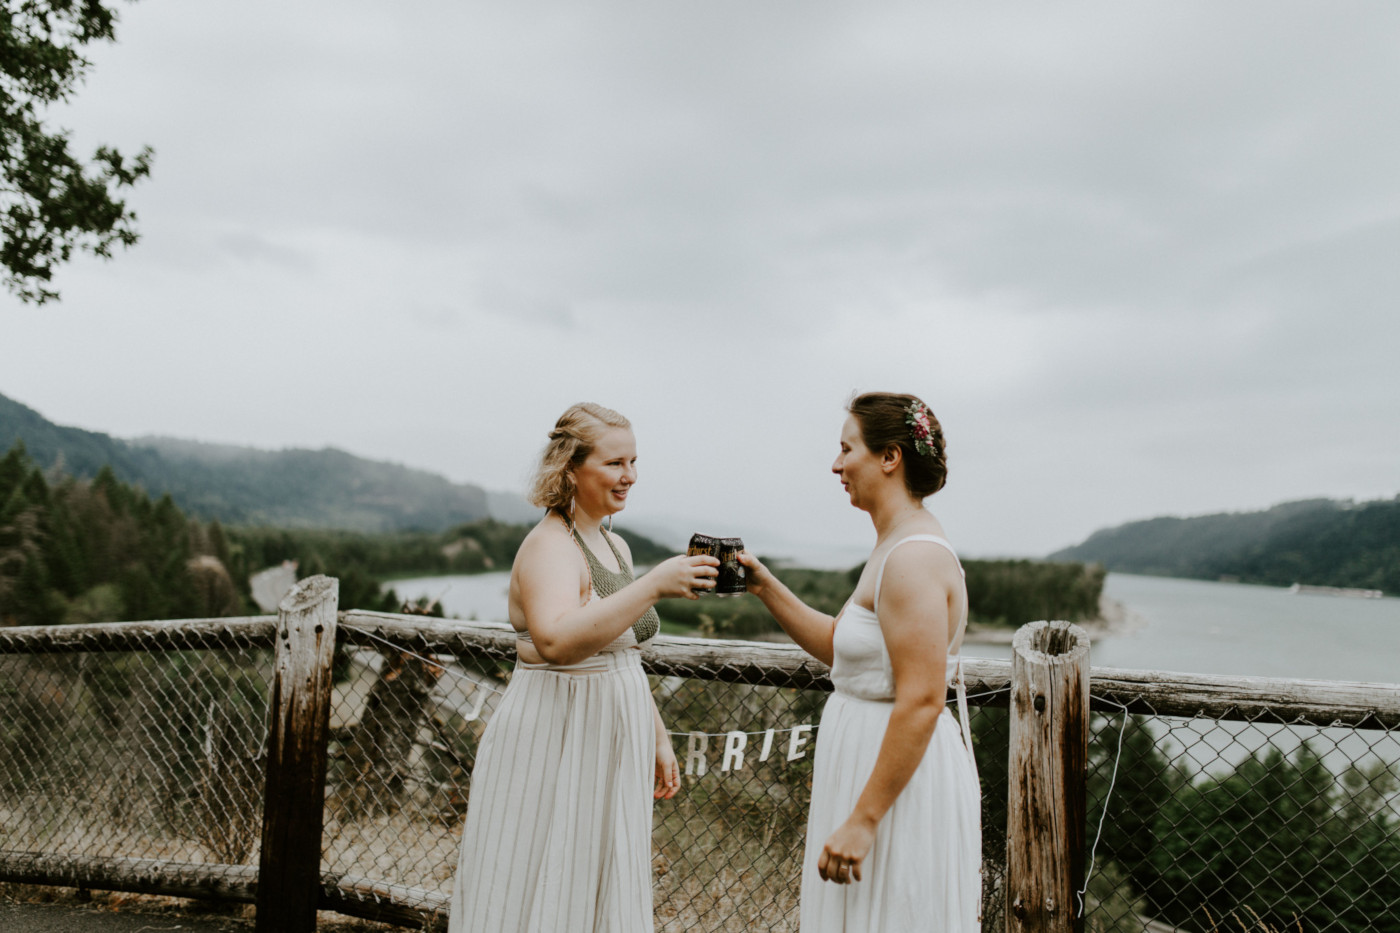 Audrey and Kate toast after their ceremony. Elopement wedding photography at Bridal Veil Falls by Sienna Plus Josh.